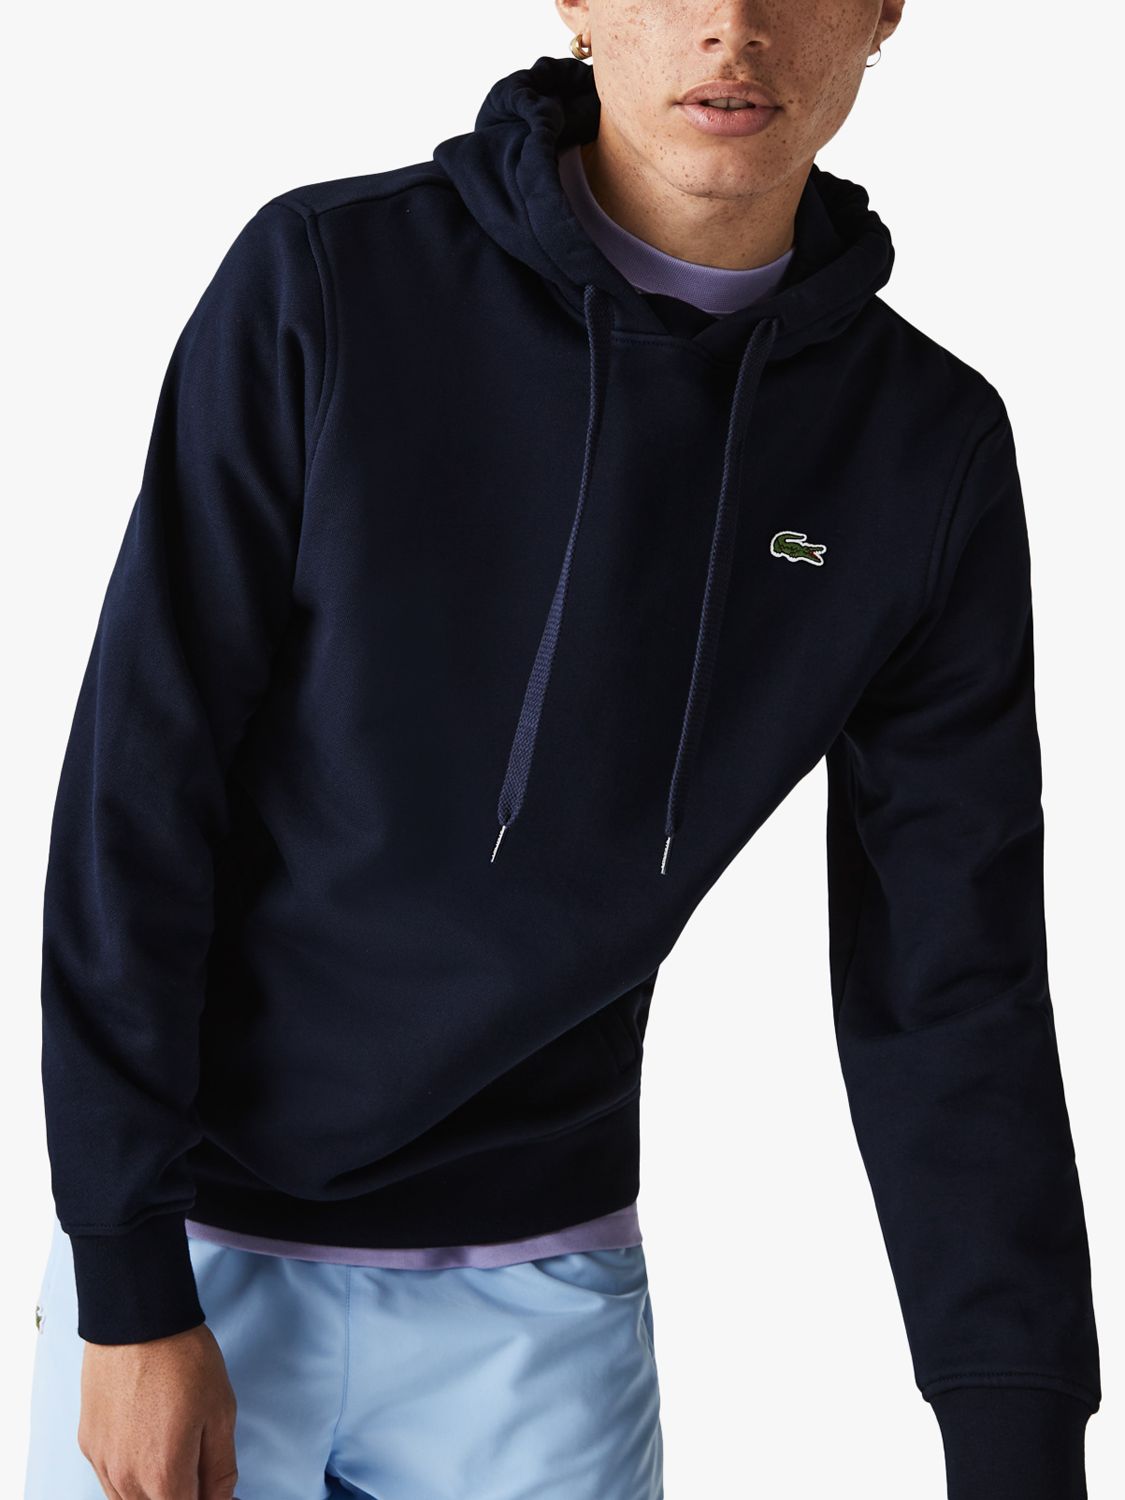 Lacoste Cotton Blend Hoodie, Navy, S